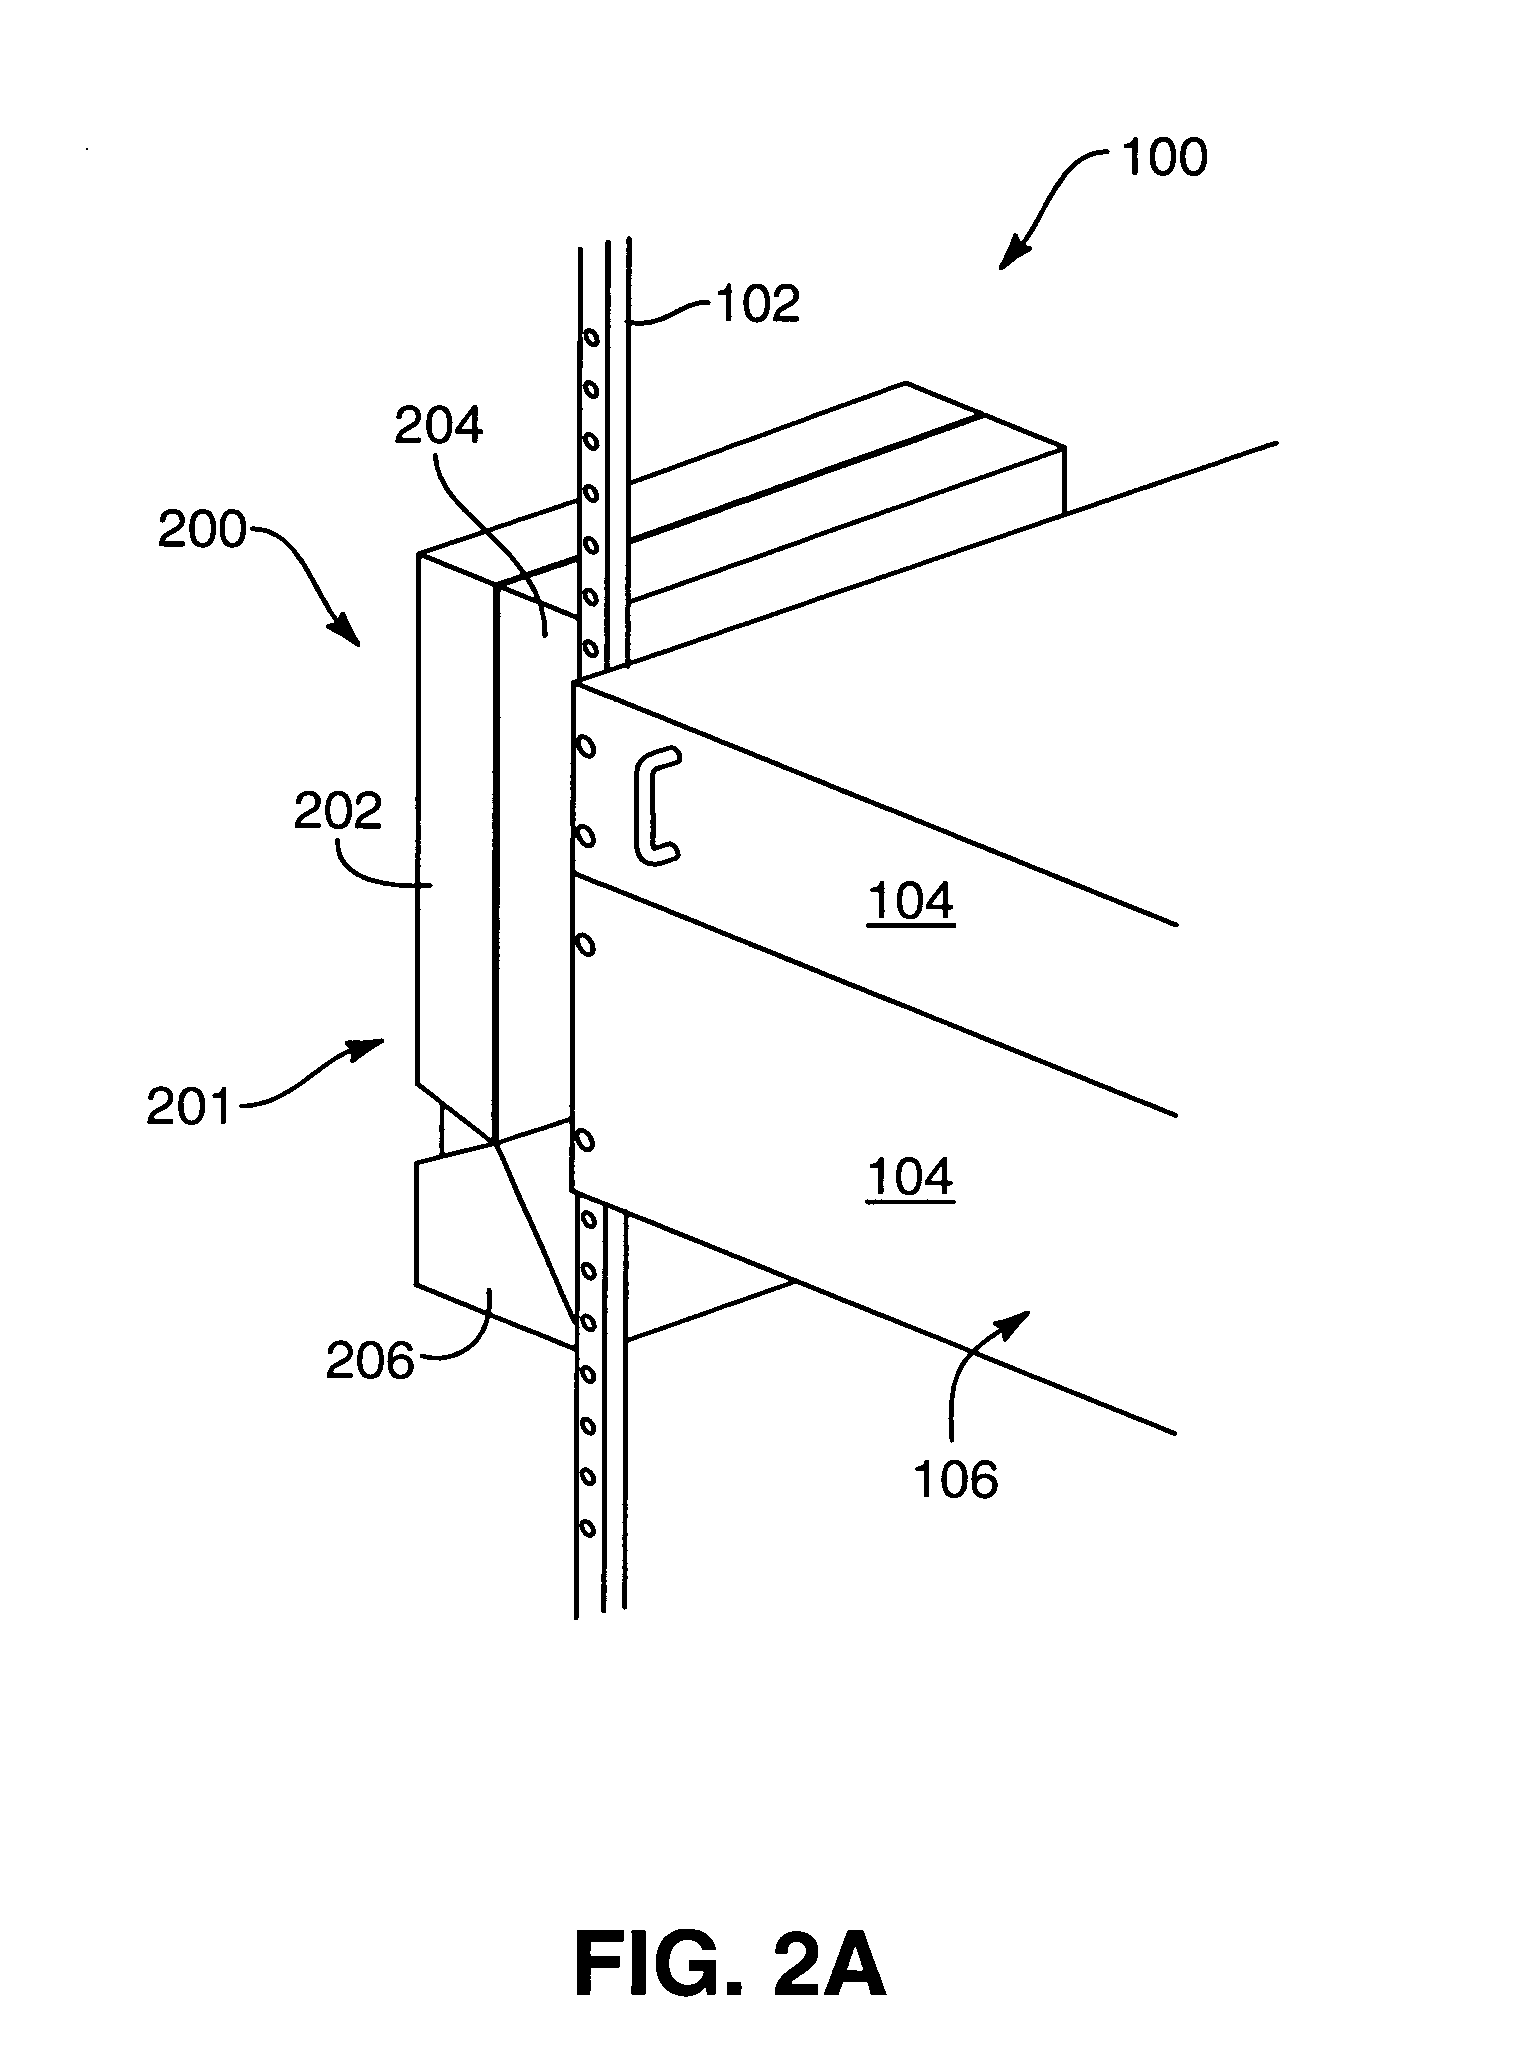 Apparatus and system for vertically storing computing devices